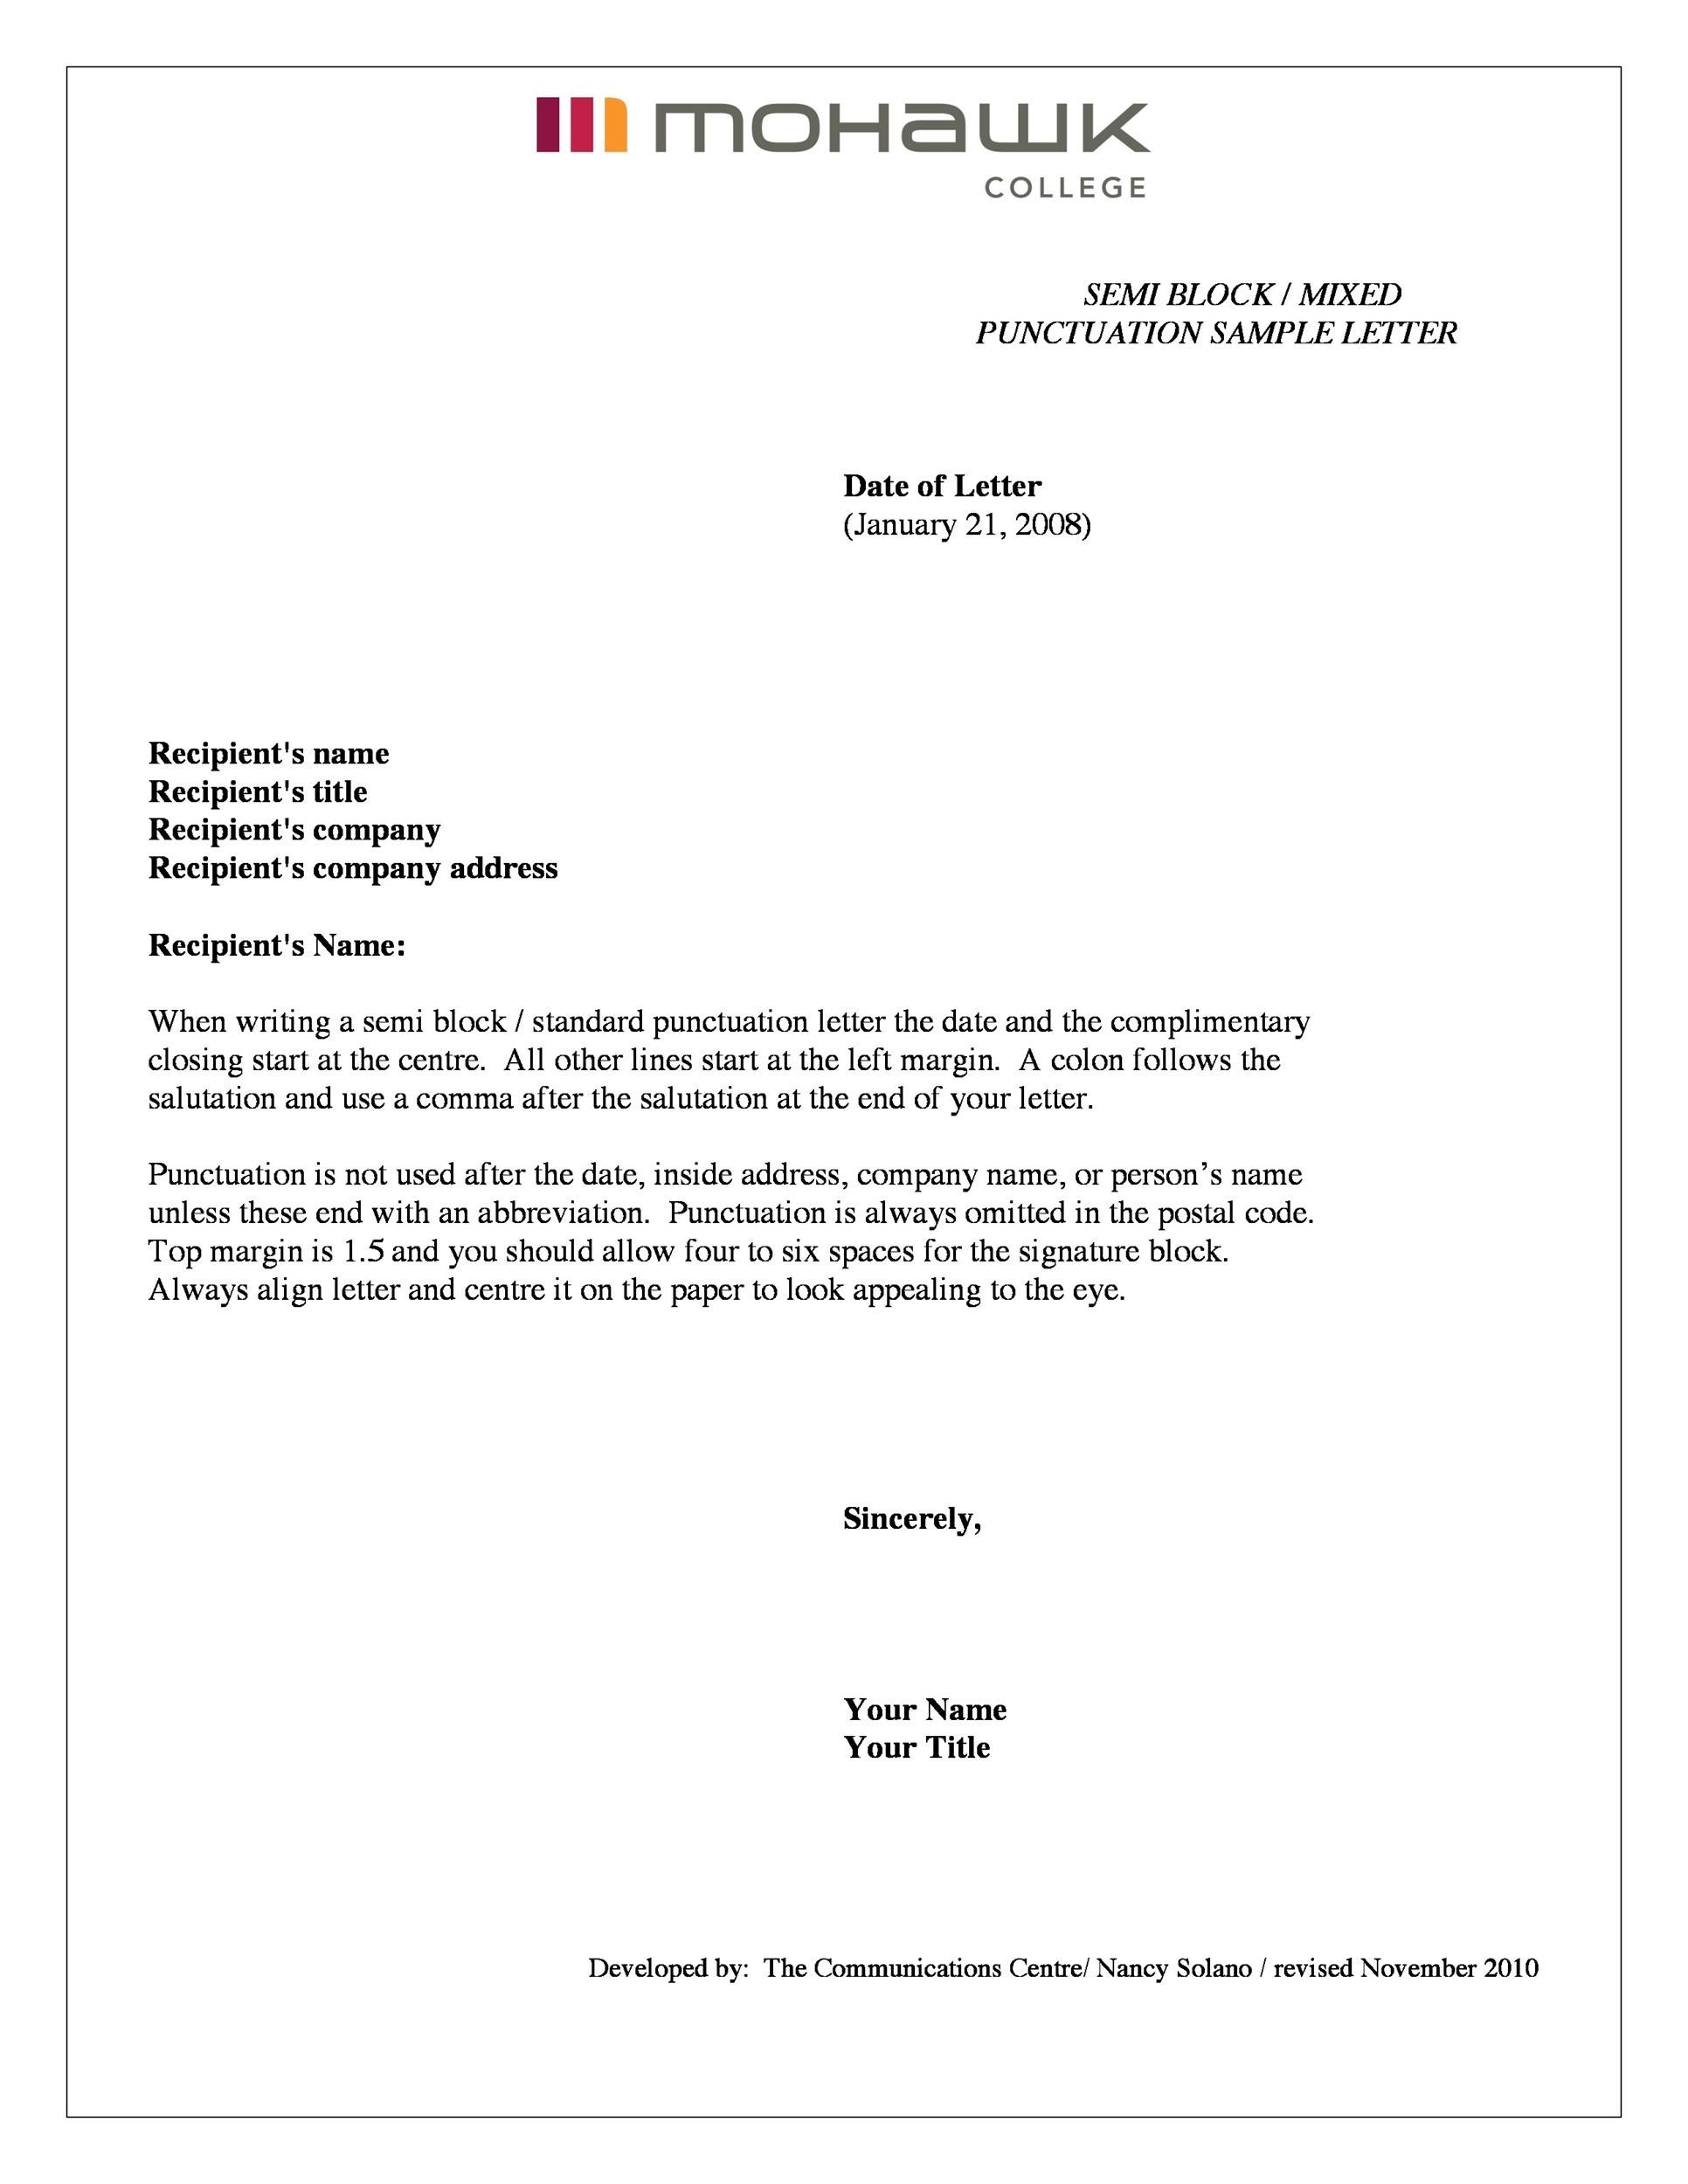 35-formal-business-letter-format-templates-examples-templatelab